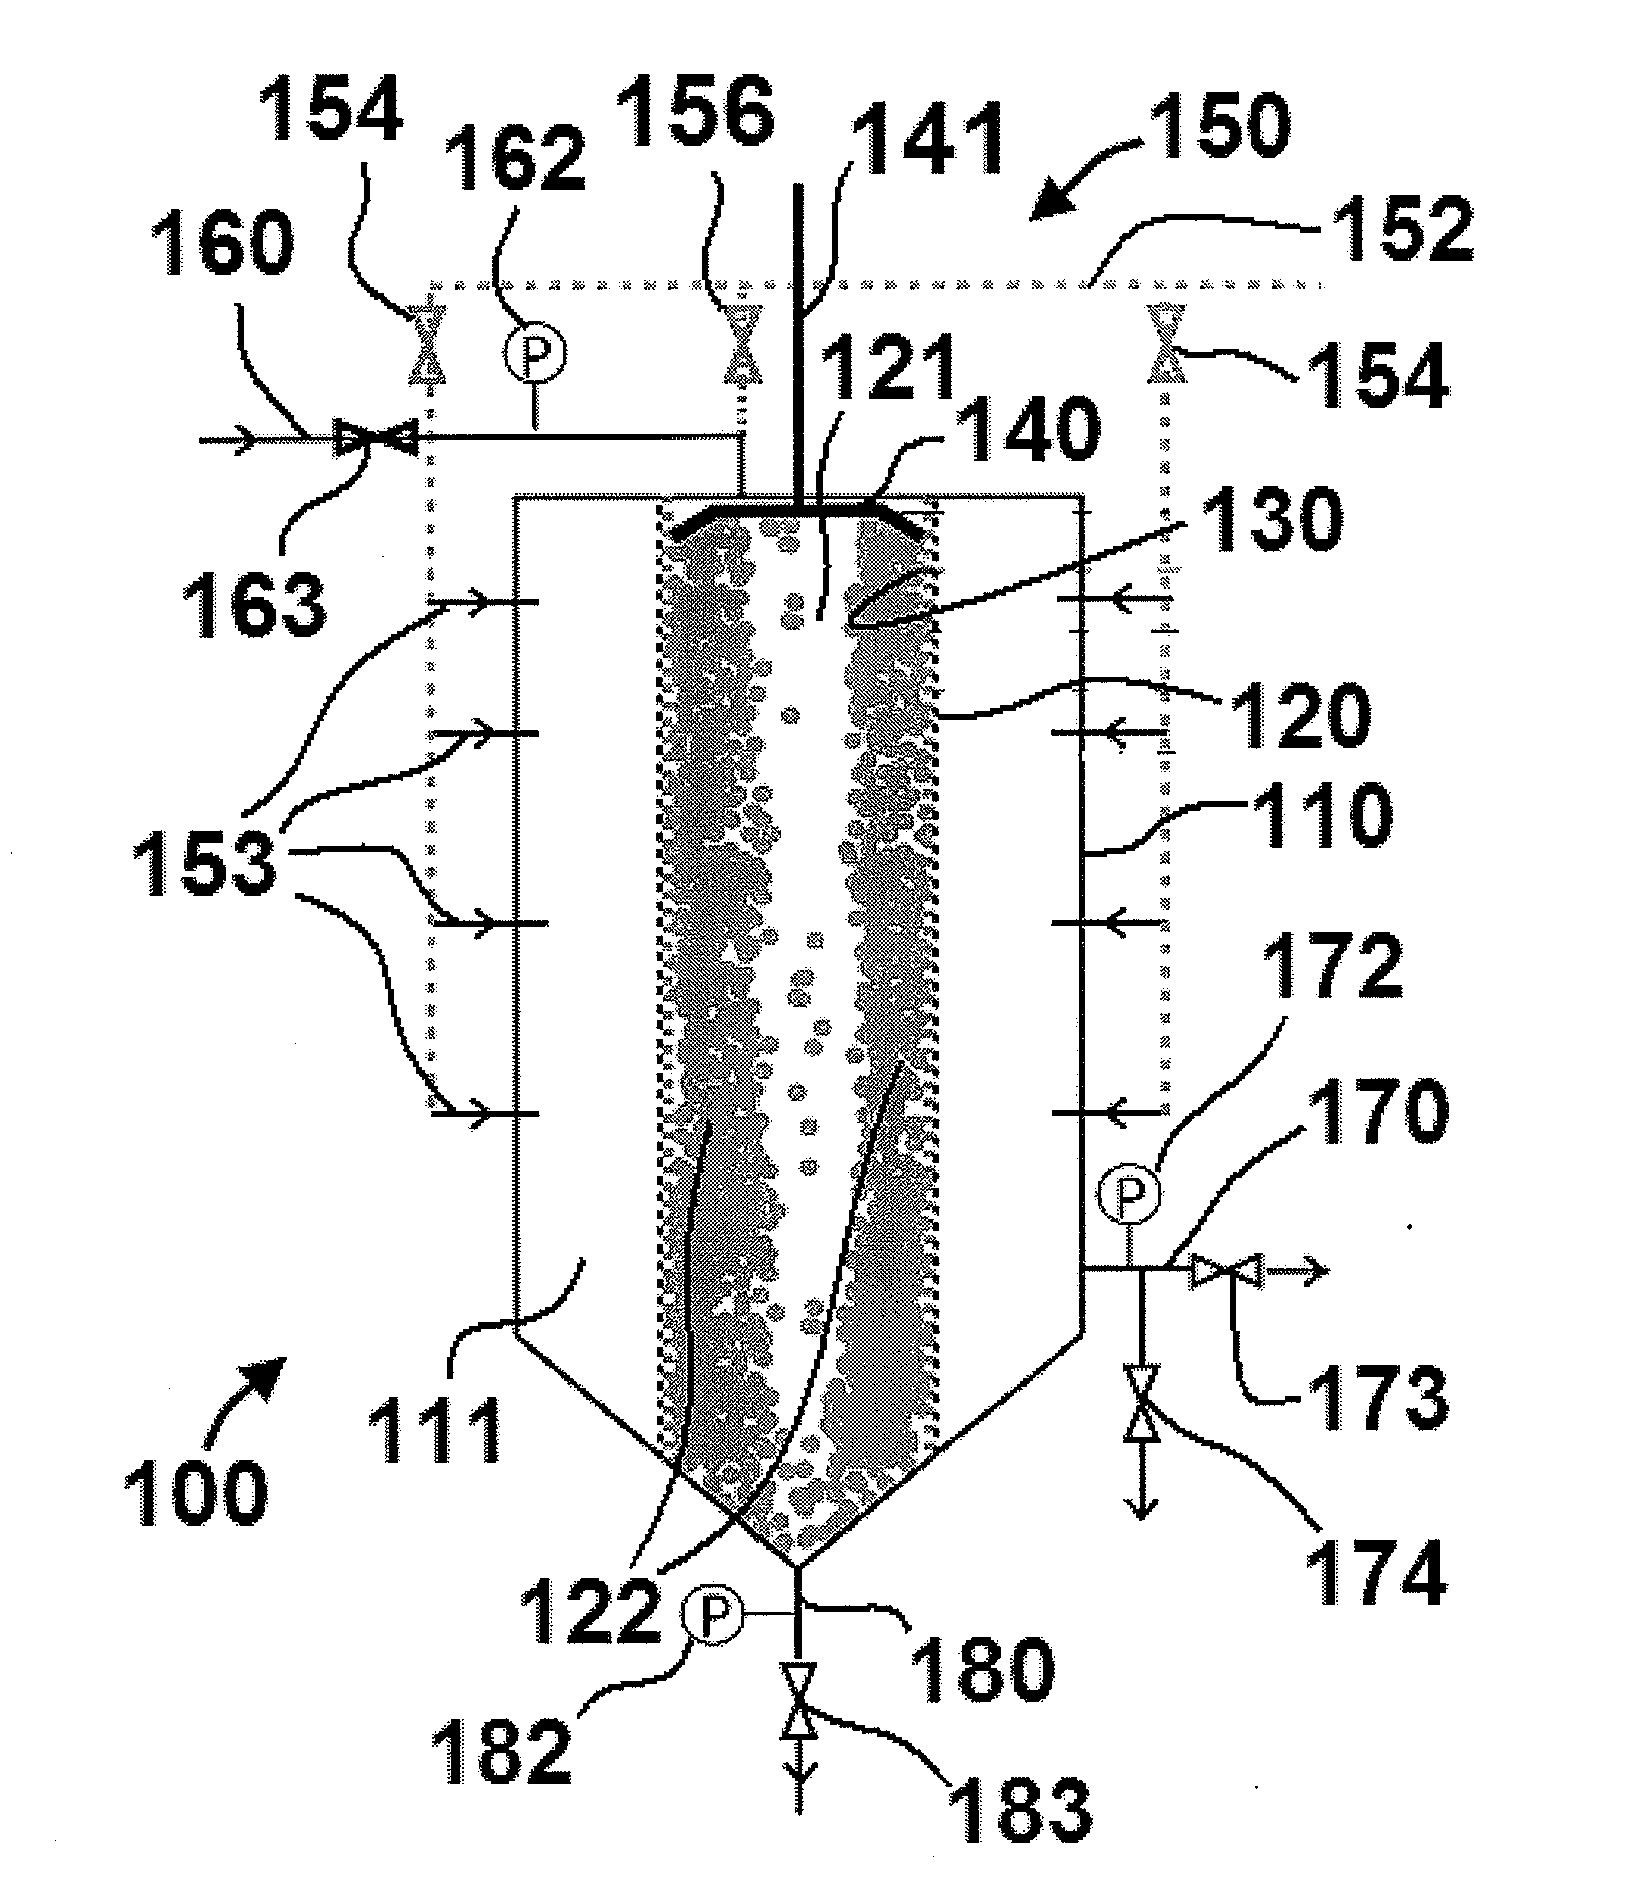 Algae filtration systems and methods